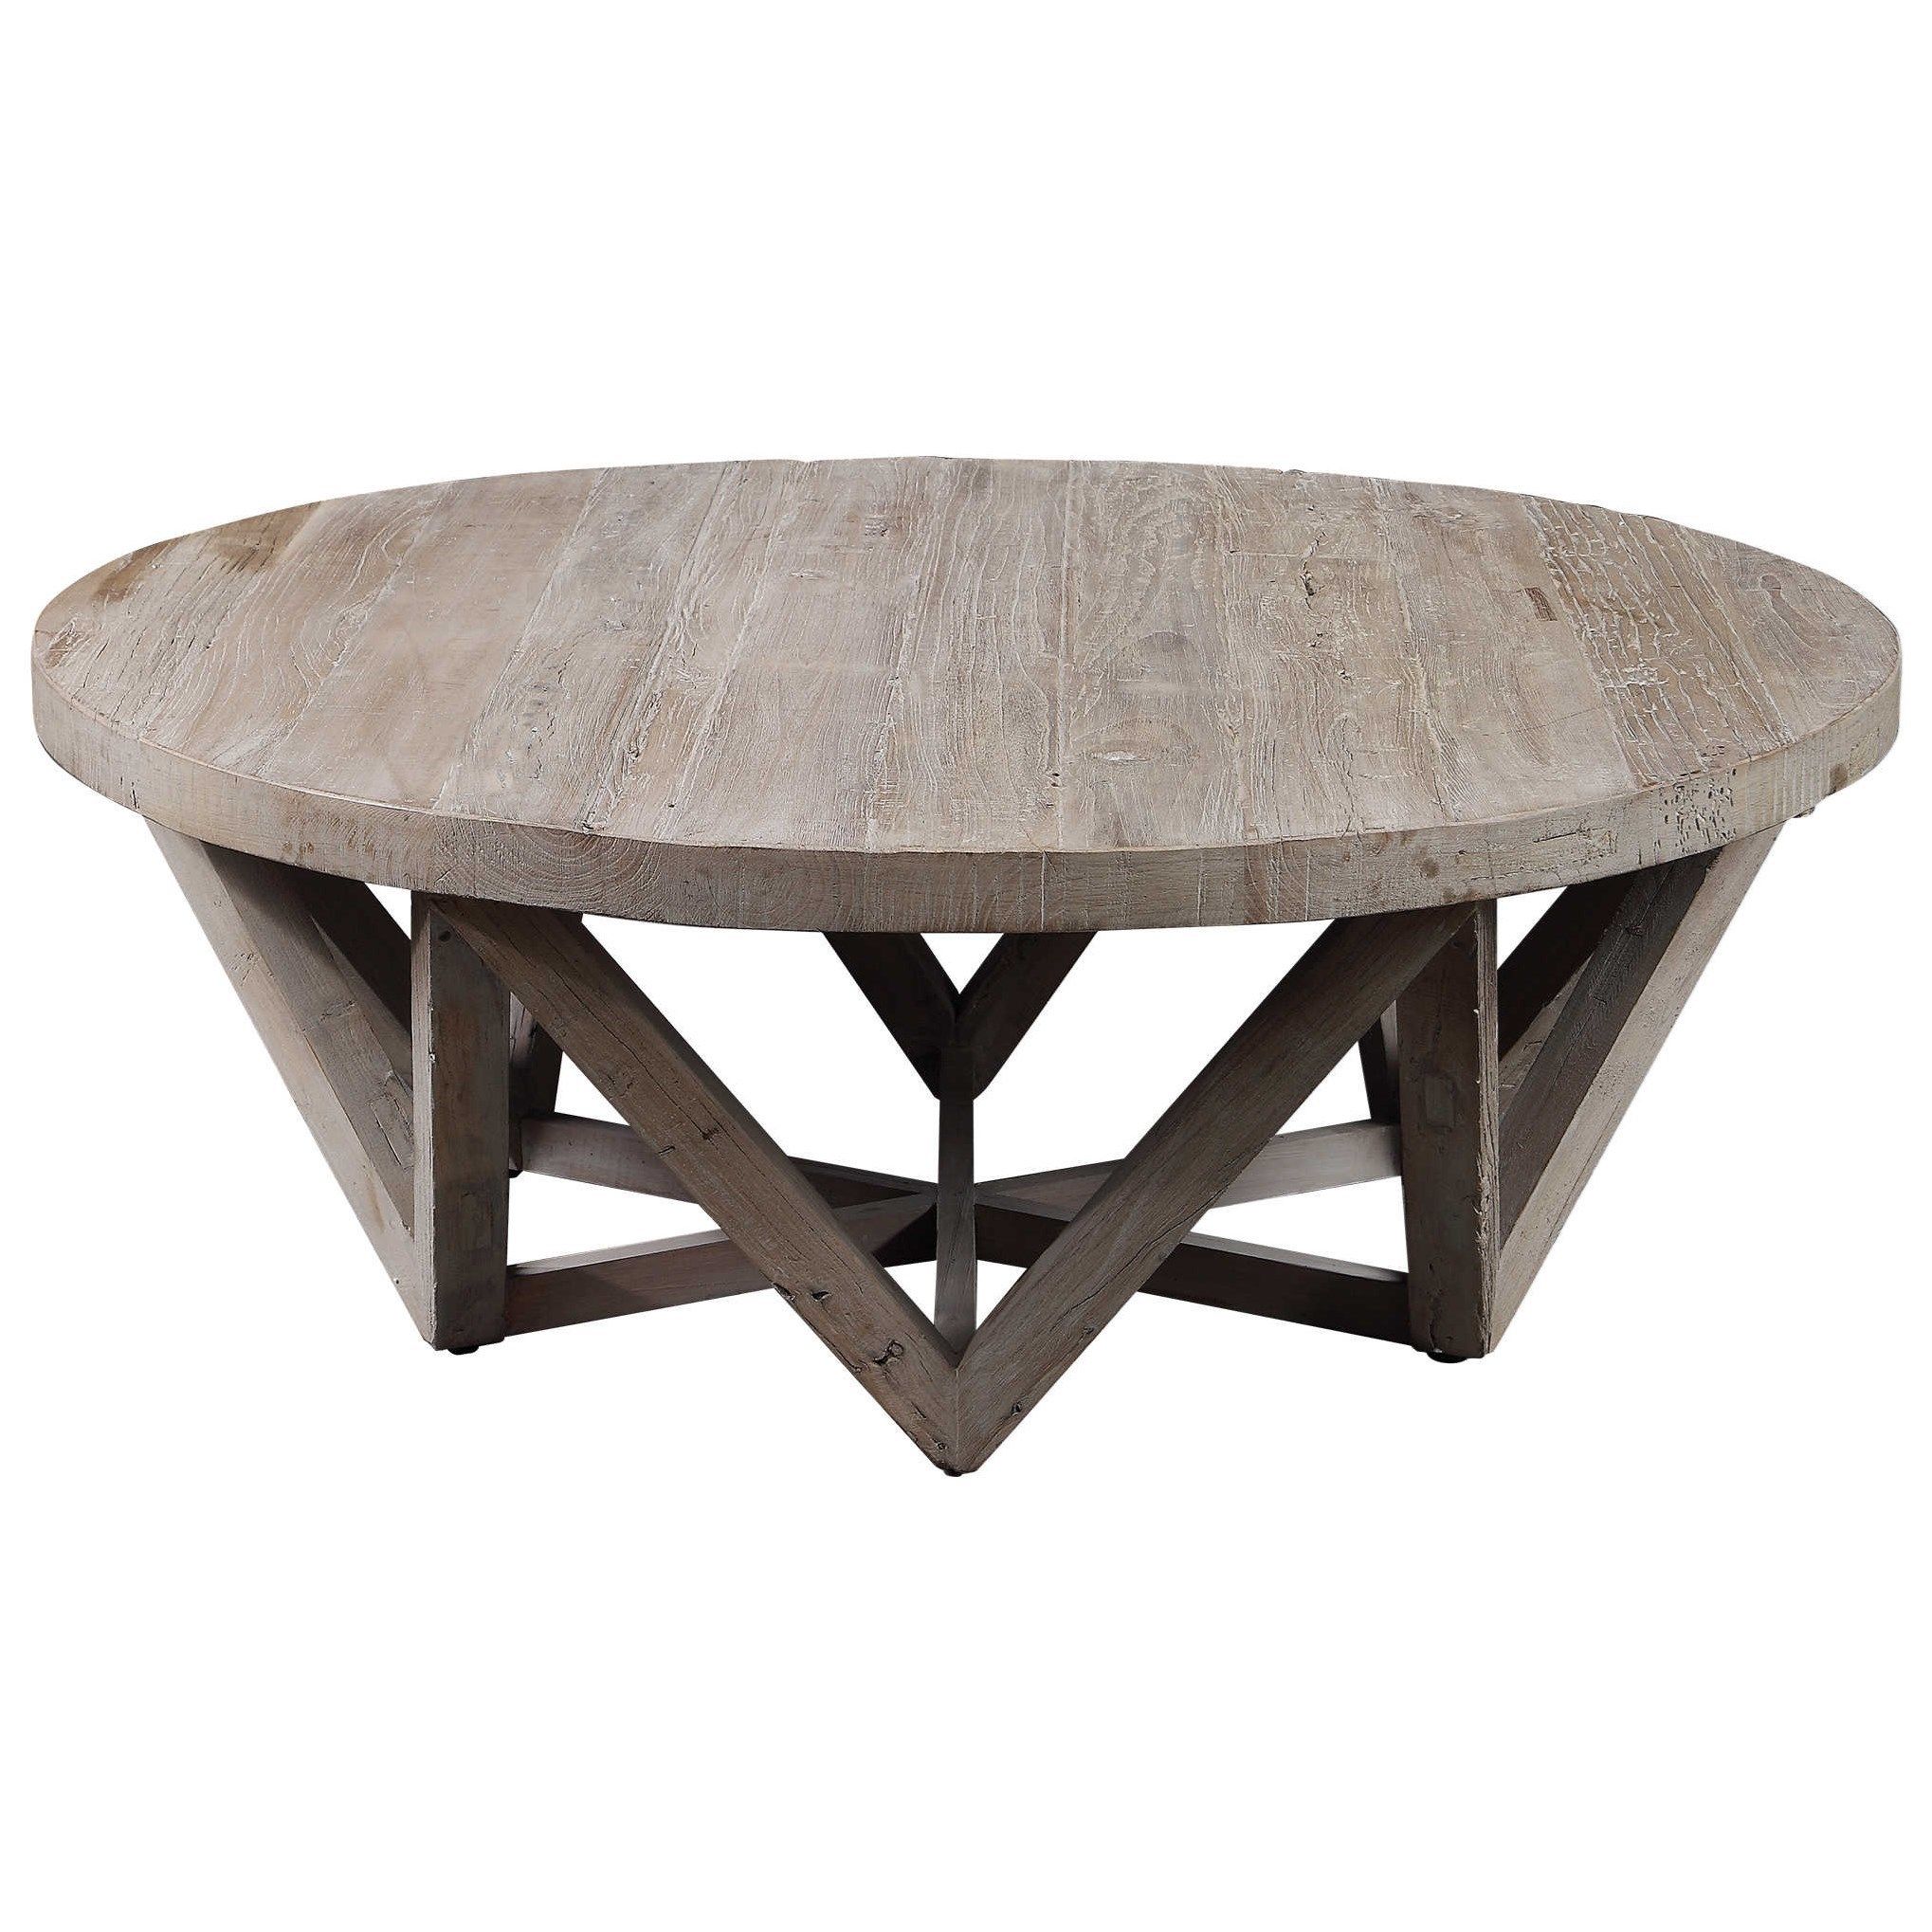 Uttermost Accent Furniture – Occasional Tables Kendry Reclaimed Wood Throughout Occasional Coffee Tables (View 10 of 20)